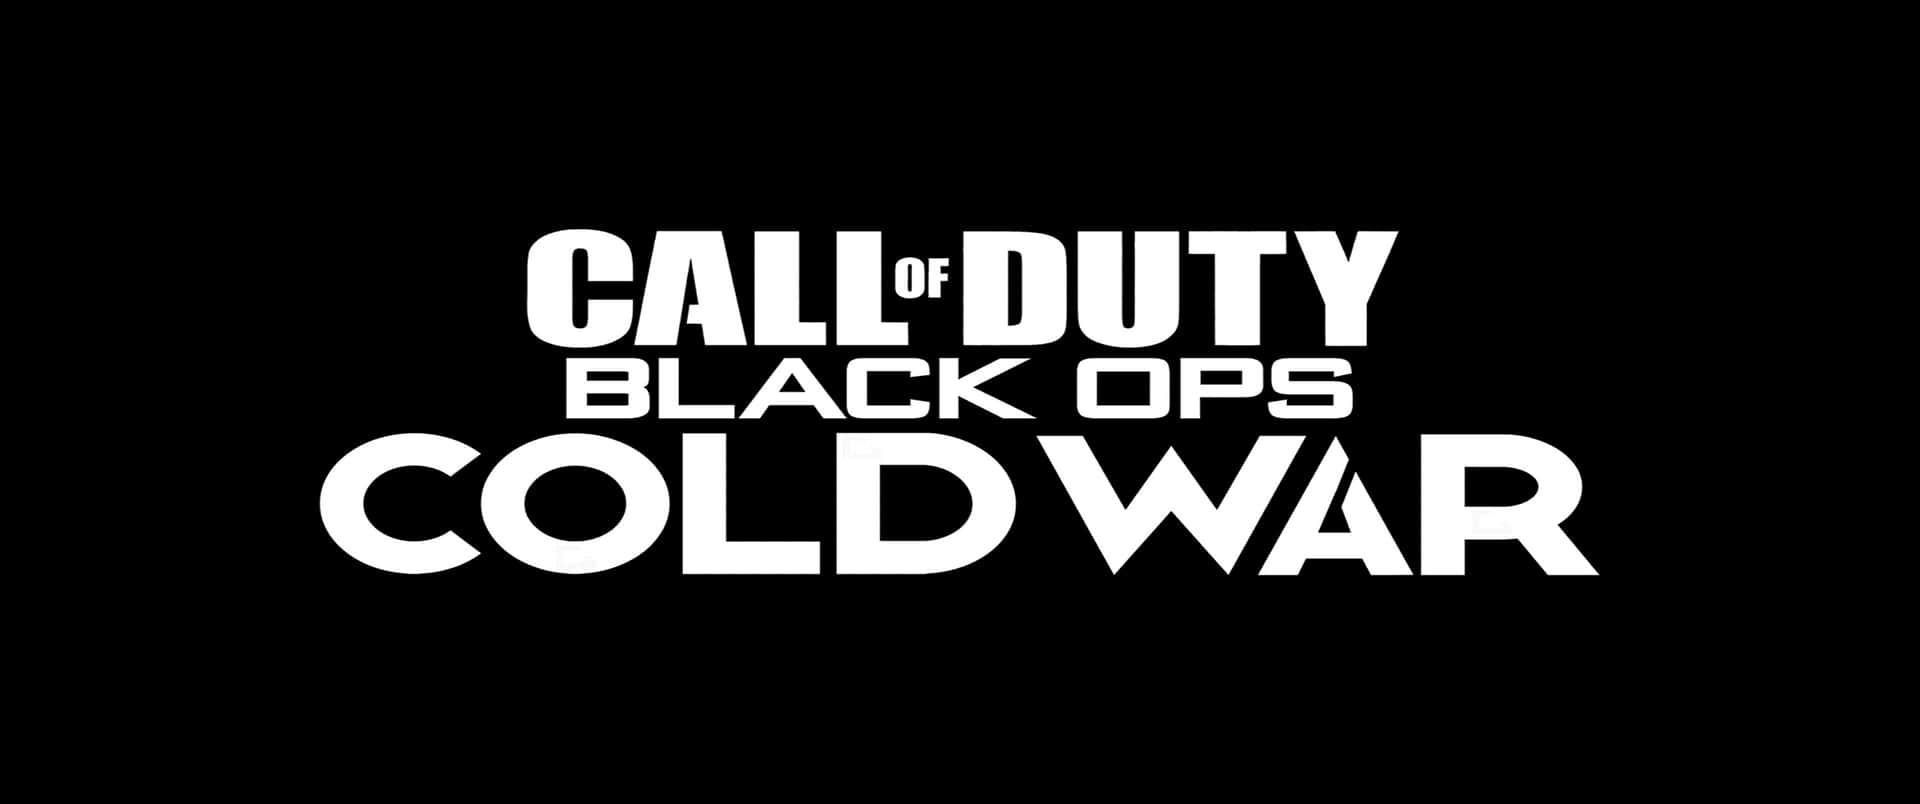 Minimalist 3440x1440p Call Of Duty Black Ops Cold War Background